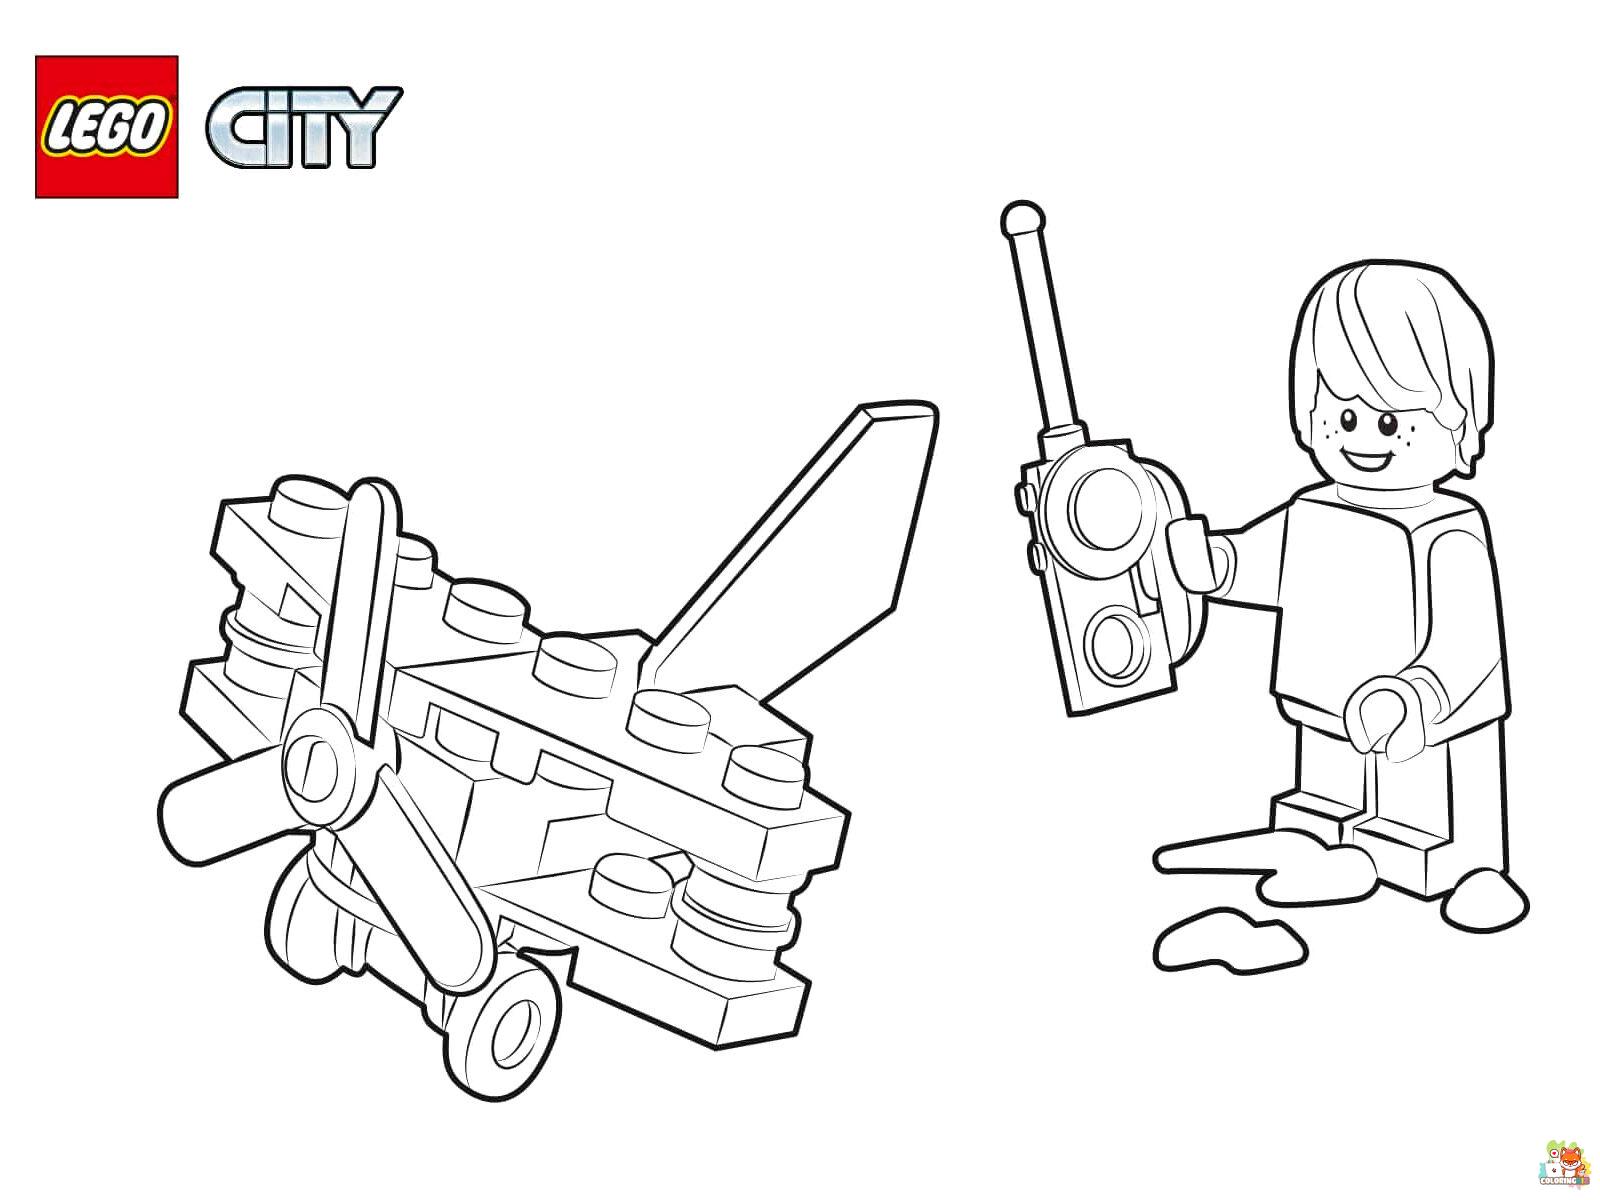 Lego City Coloring Pages 17 1